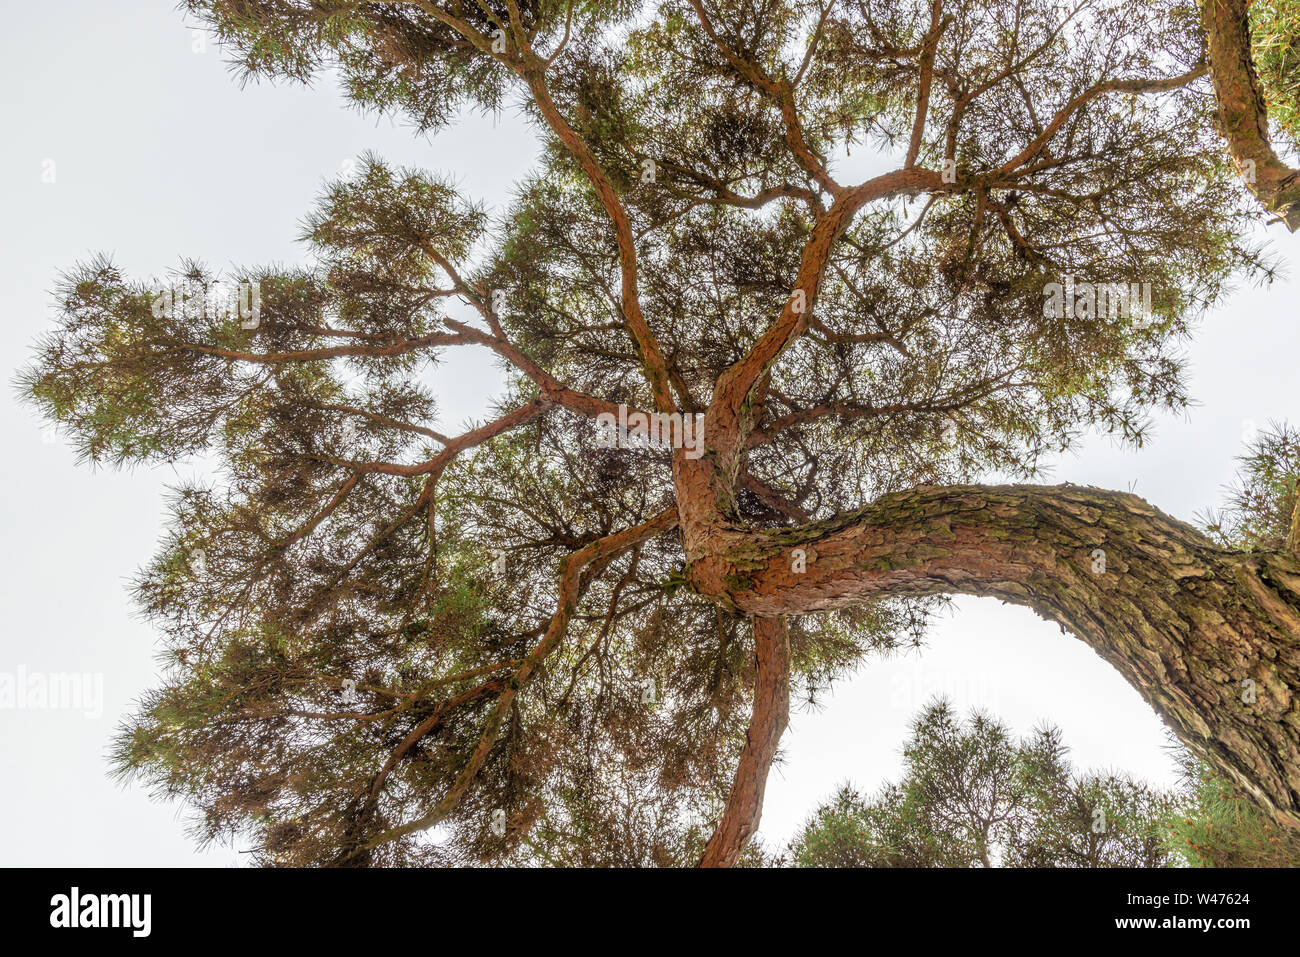 Japanese pine tree seen from bellow, taken during a summer afternoon in Gyeongju, South Korea Stock Photo